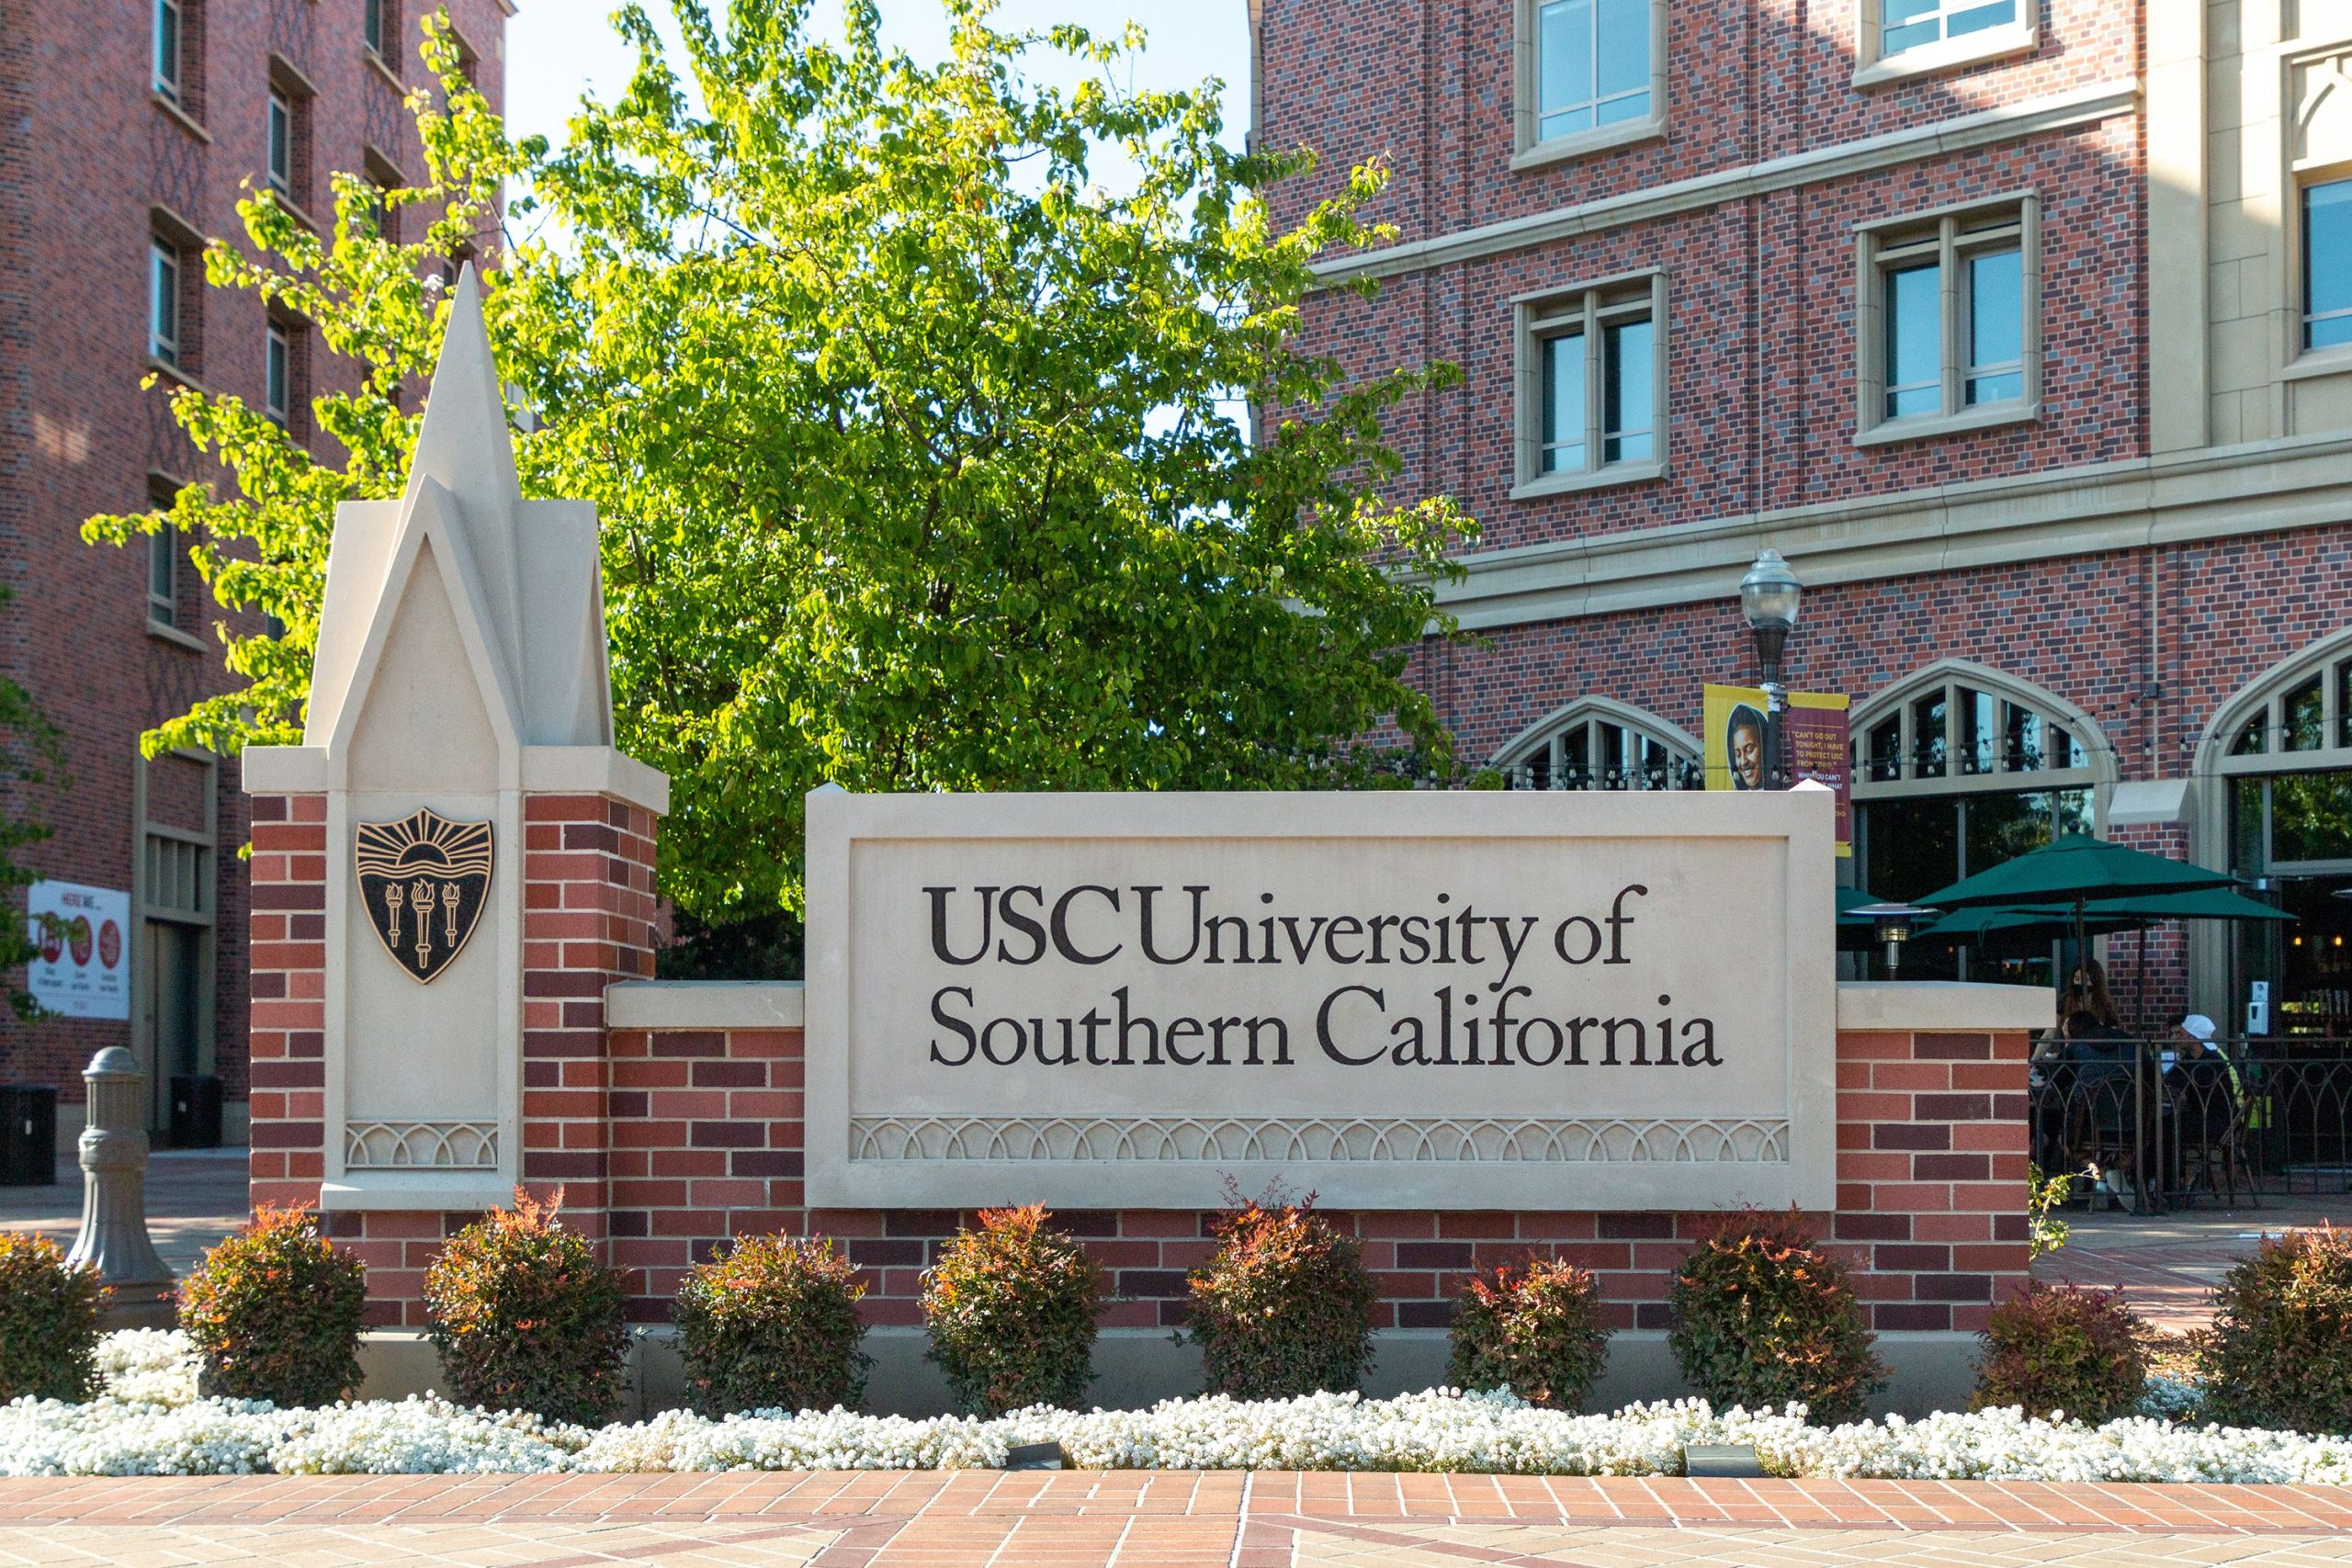 How to Ship A Car to or from the University of Southern California USC - Los Angeles, CA